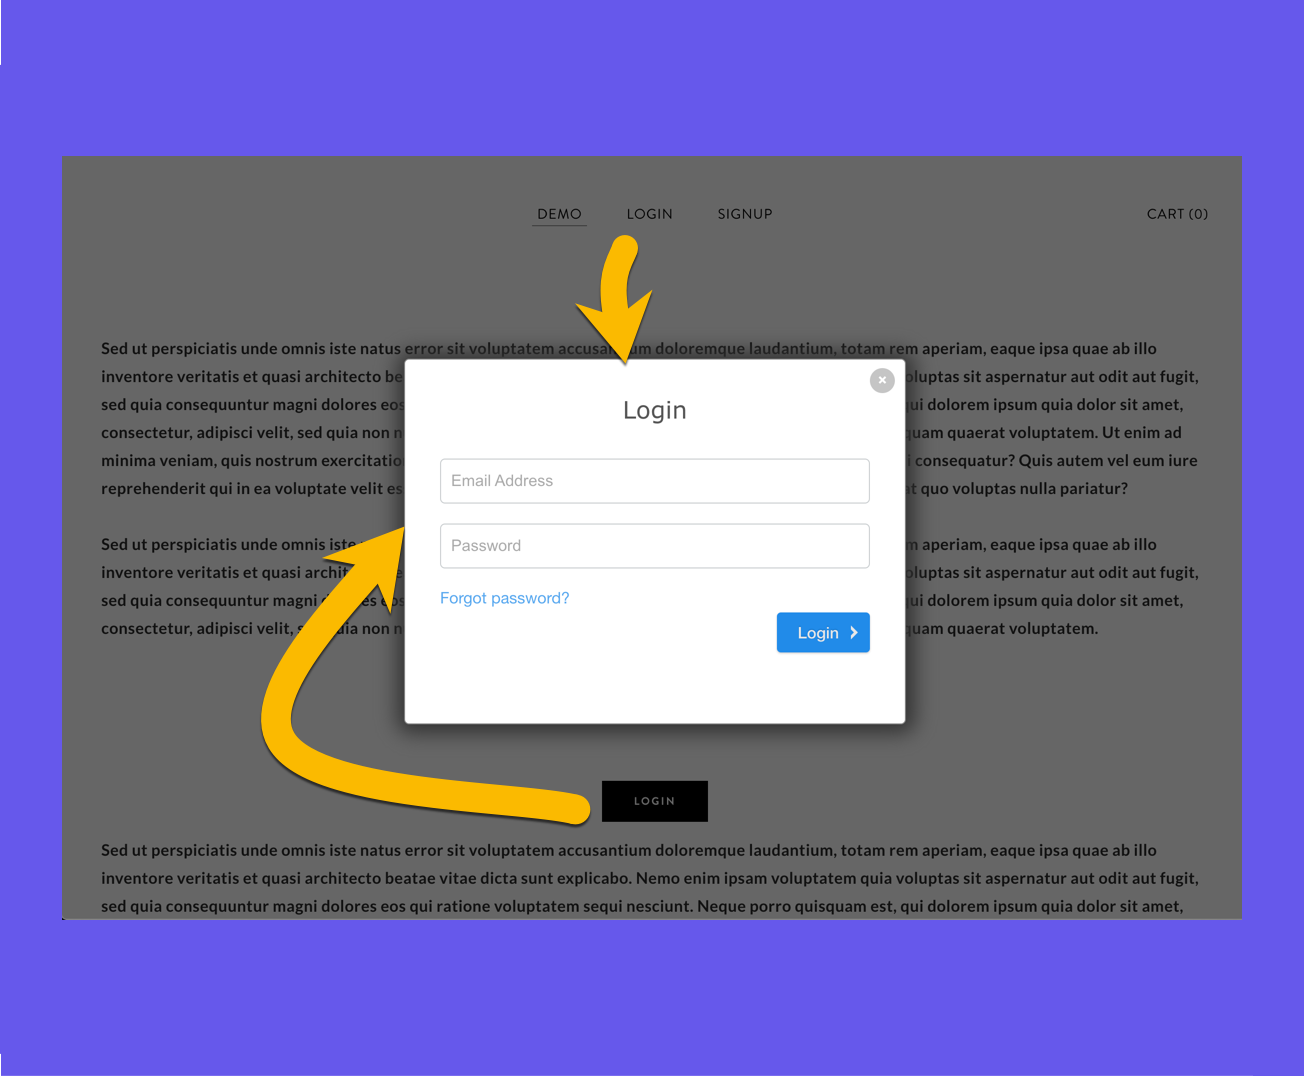 Add our login link to your navigation or as a button. When clicked, our hosted login form appears on your website so customers can log in. This allows your customers to use Stripe Customer Portal.